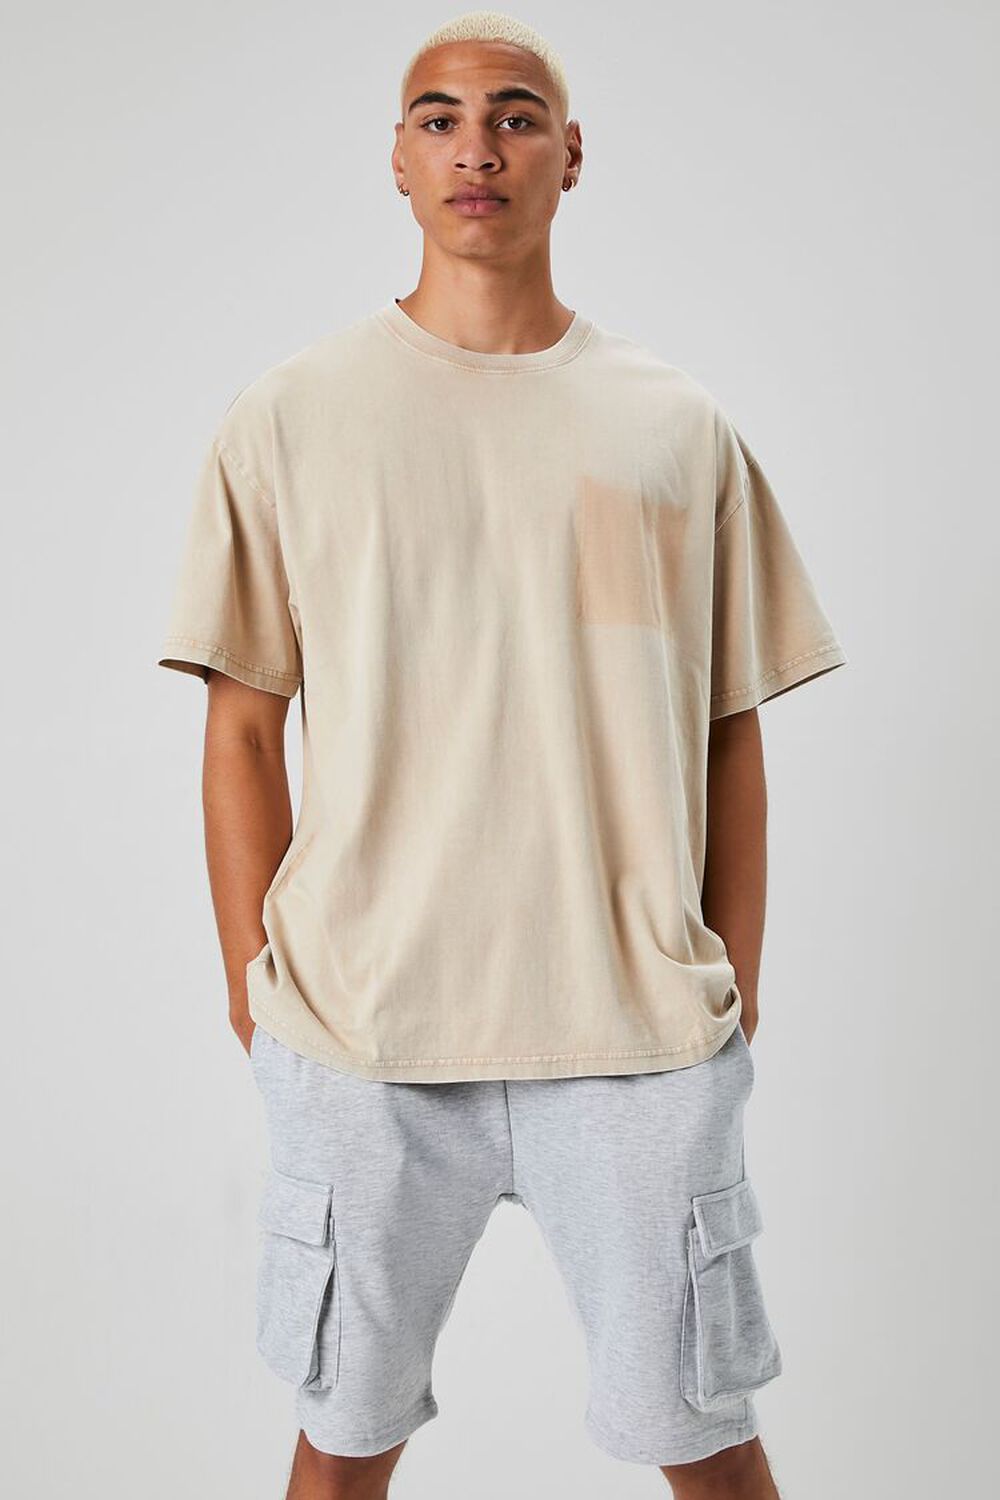 TAUPE Mineral Wash Crew Neck Tee, image 1